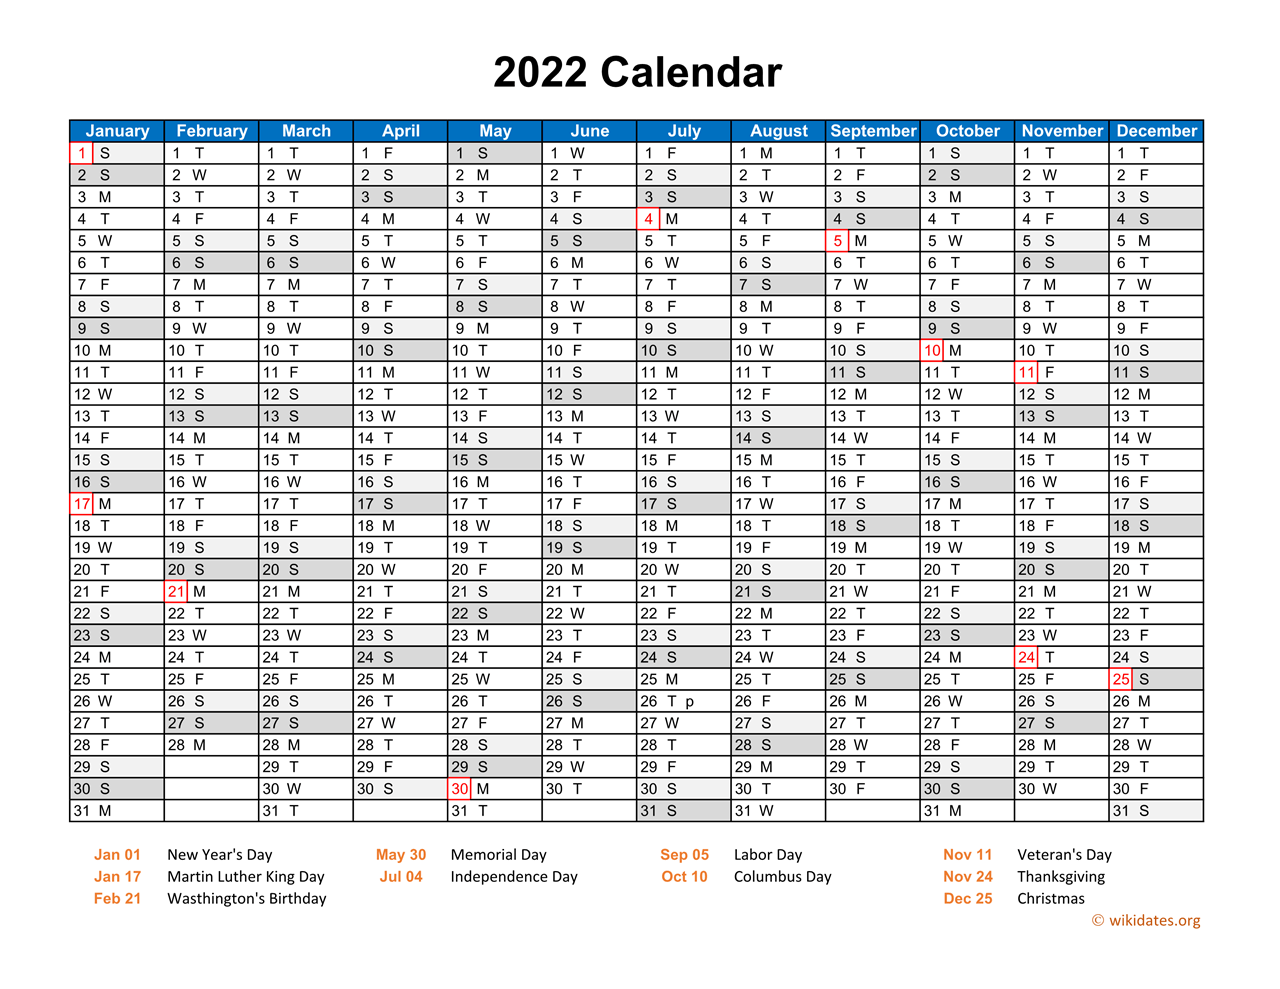 Full Page Calendar 2022 2022 Calendar Horizontal, One Page | Wikidates.org